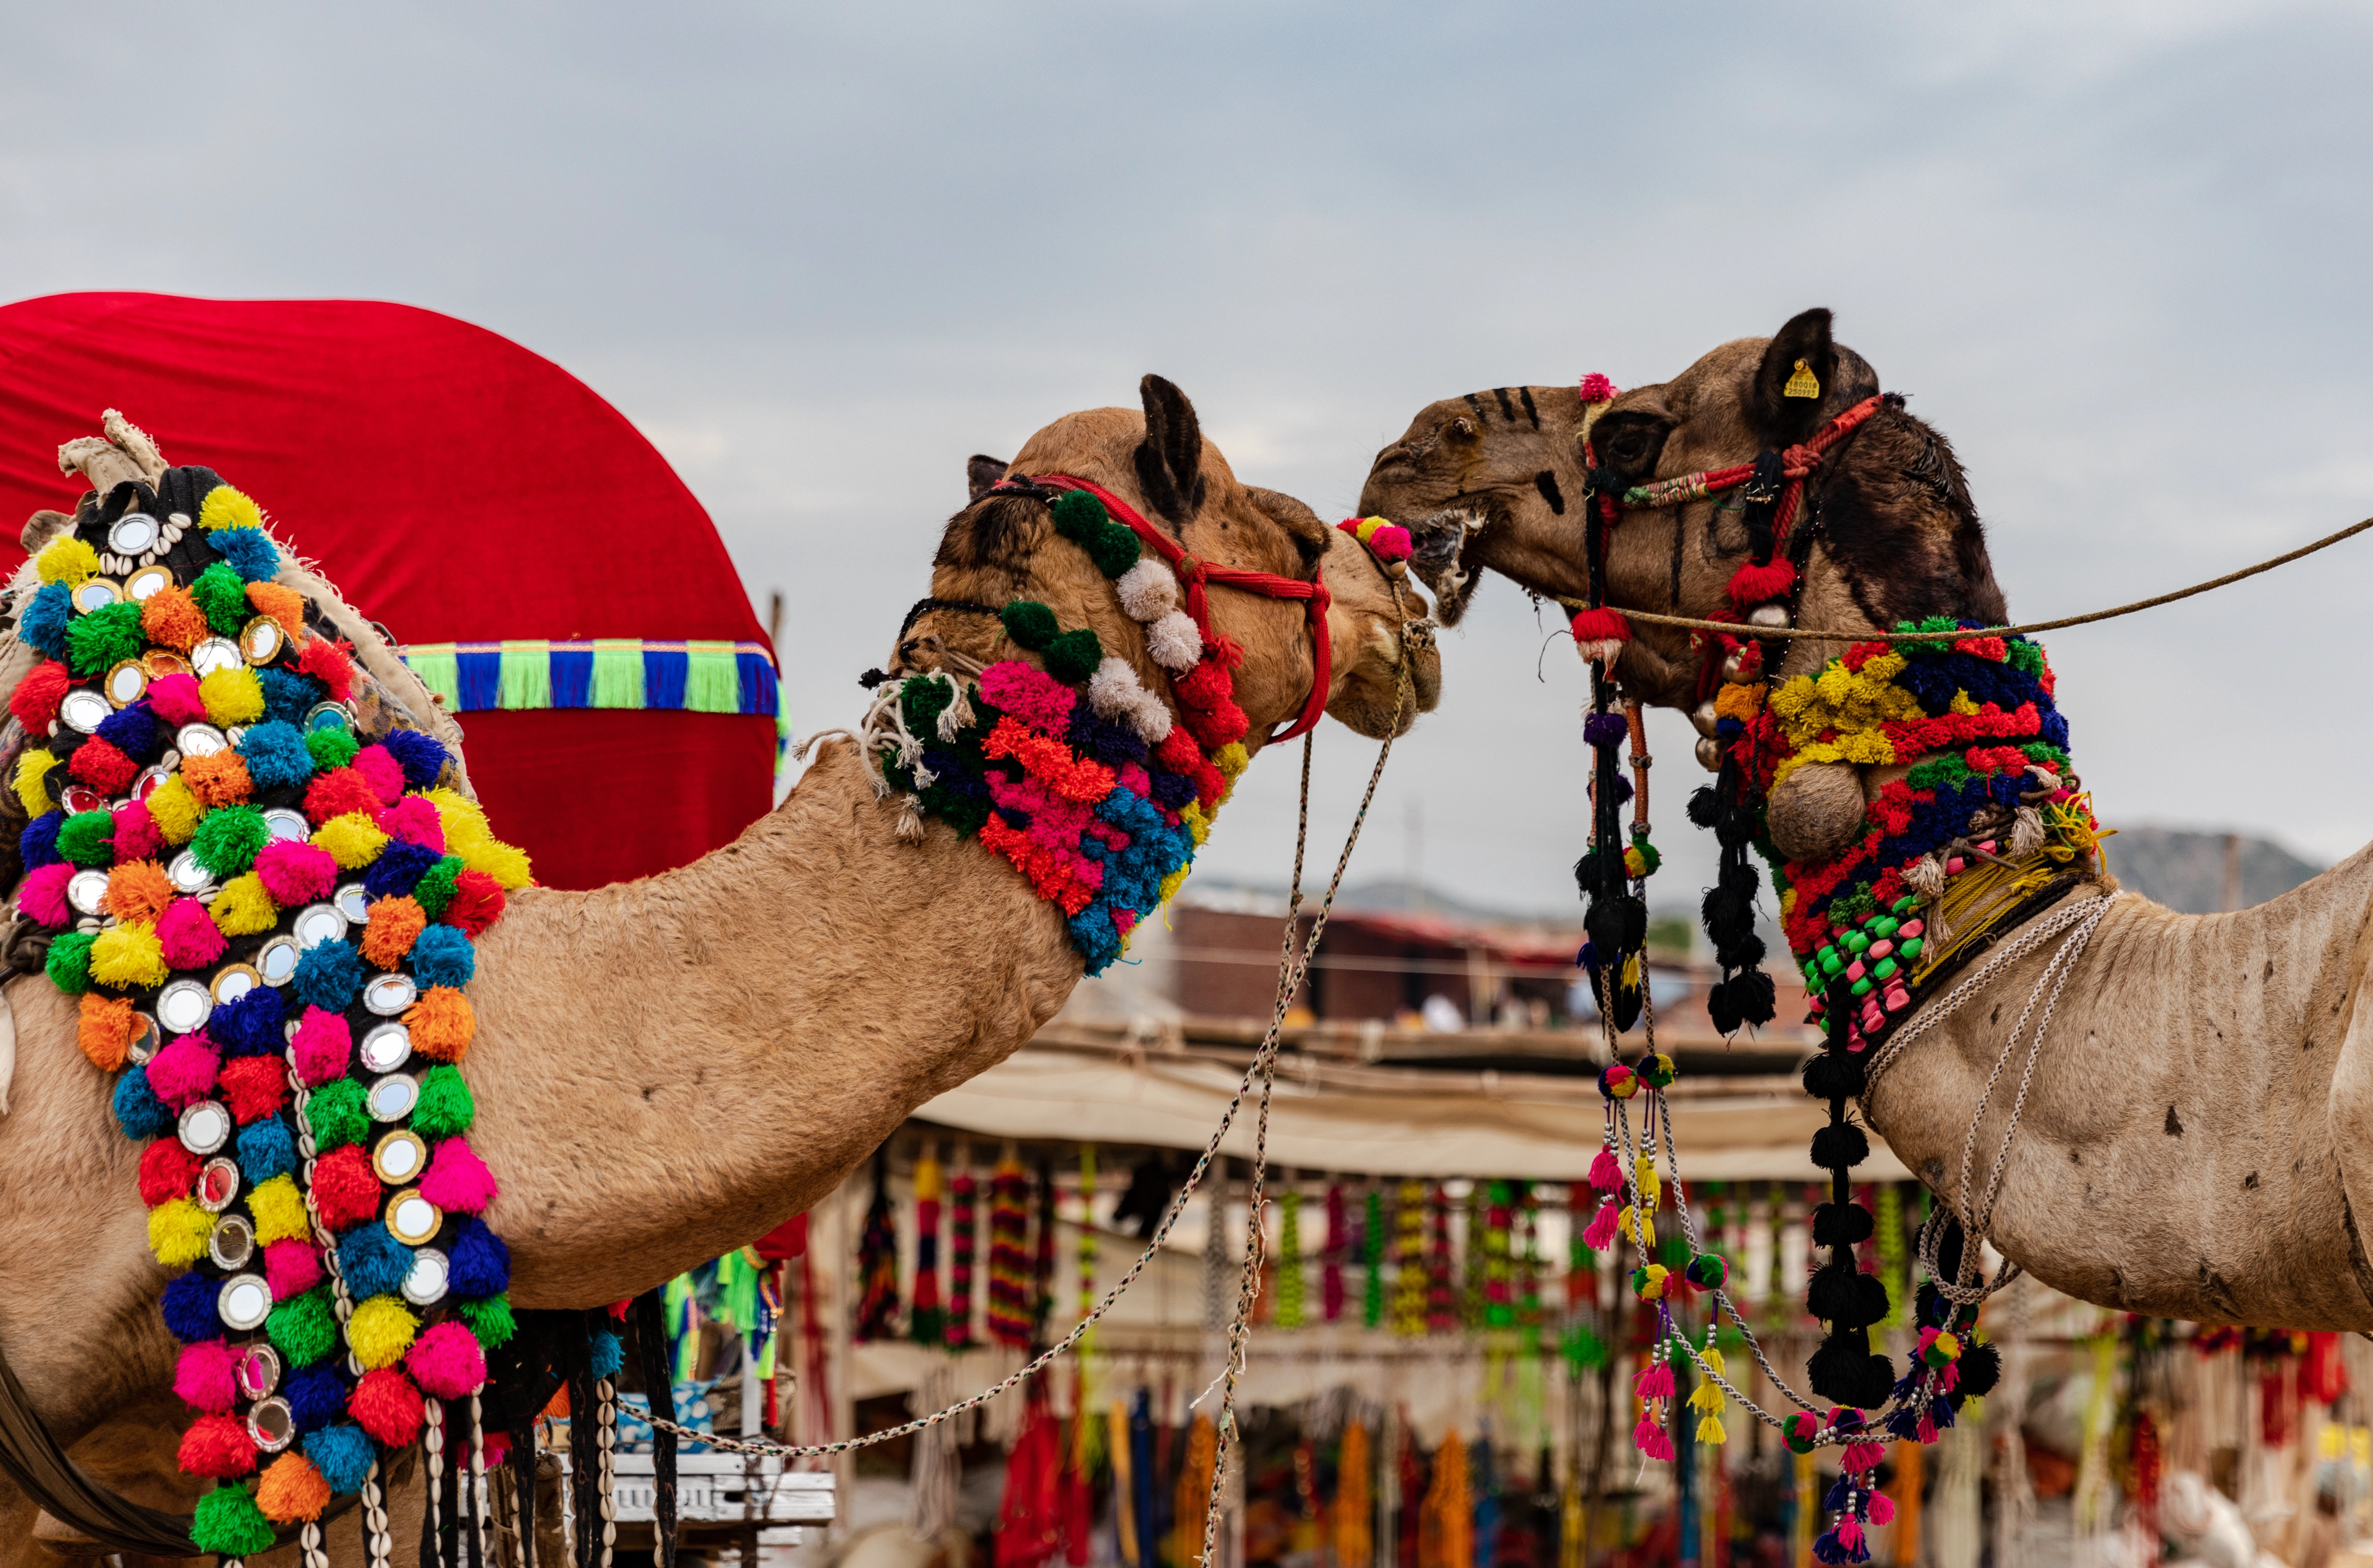 Decorated camels during Pushkar Camel Fair in India